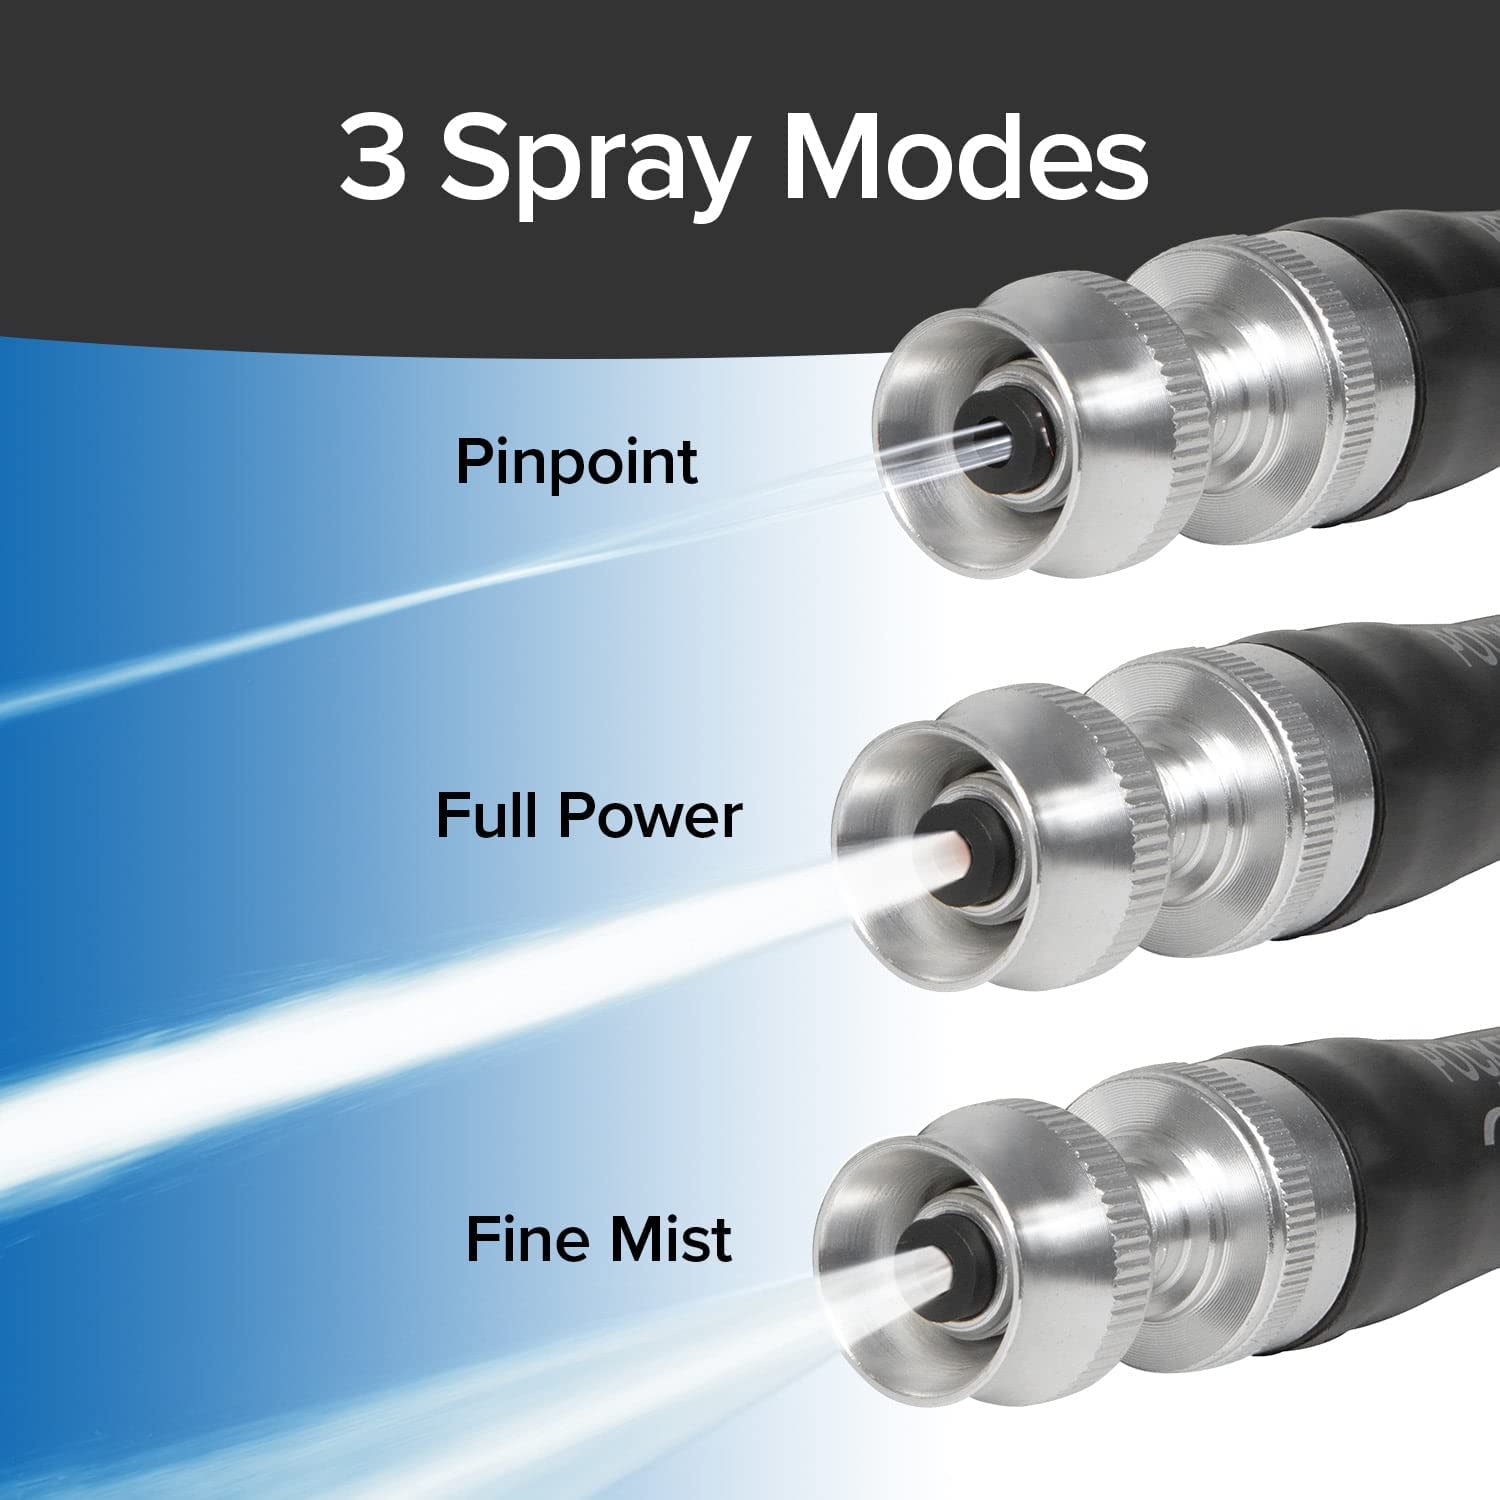 HydroJet Pro™: High-Pressure Water Nozzle for Efficient Car Washing and Home Cleaning